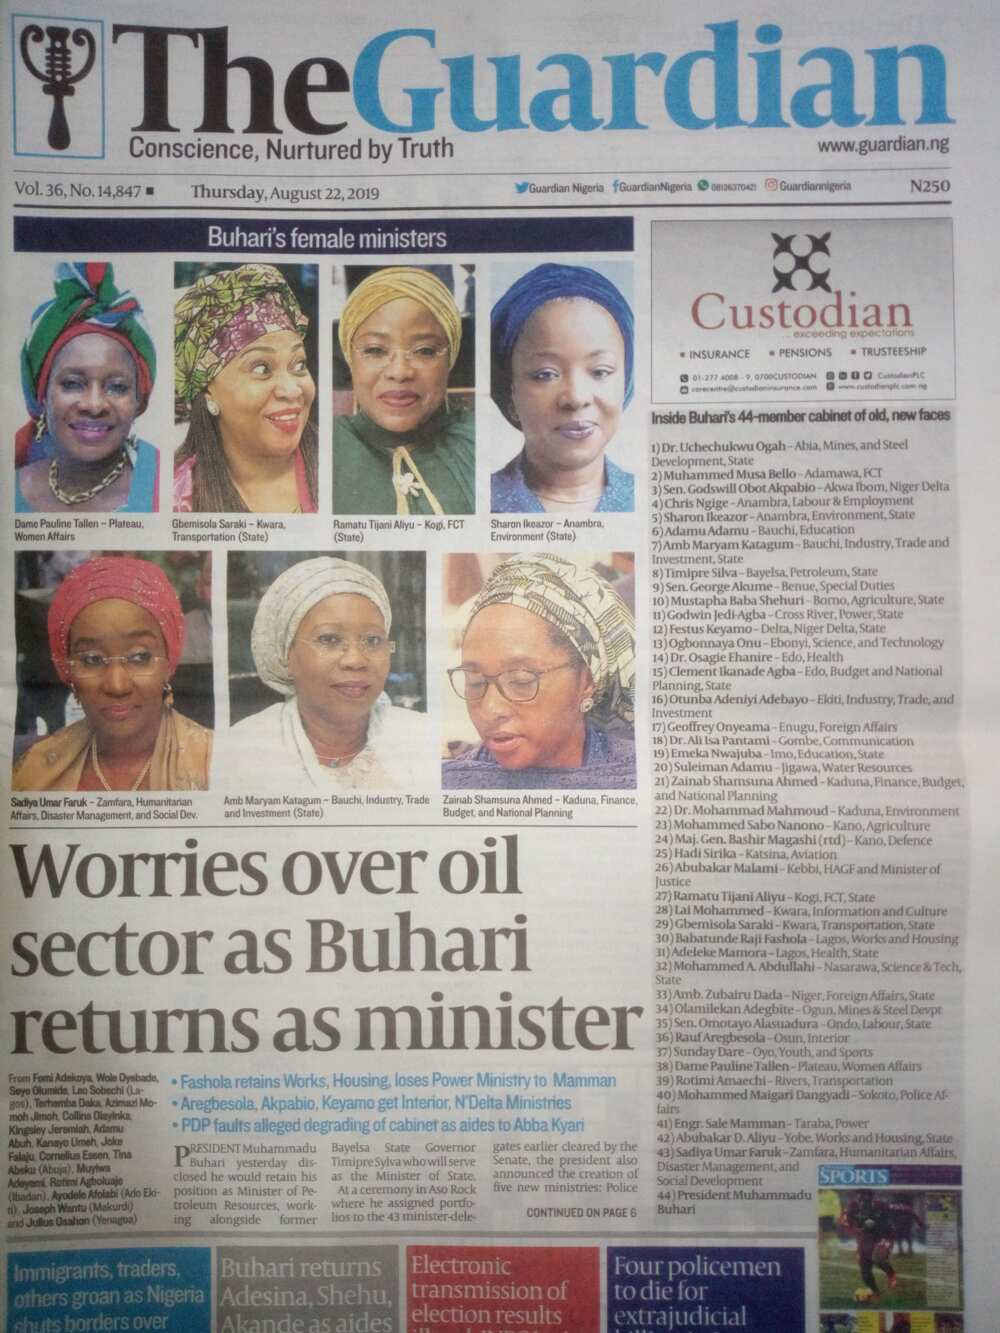 The Guardian newspaper review of August 22